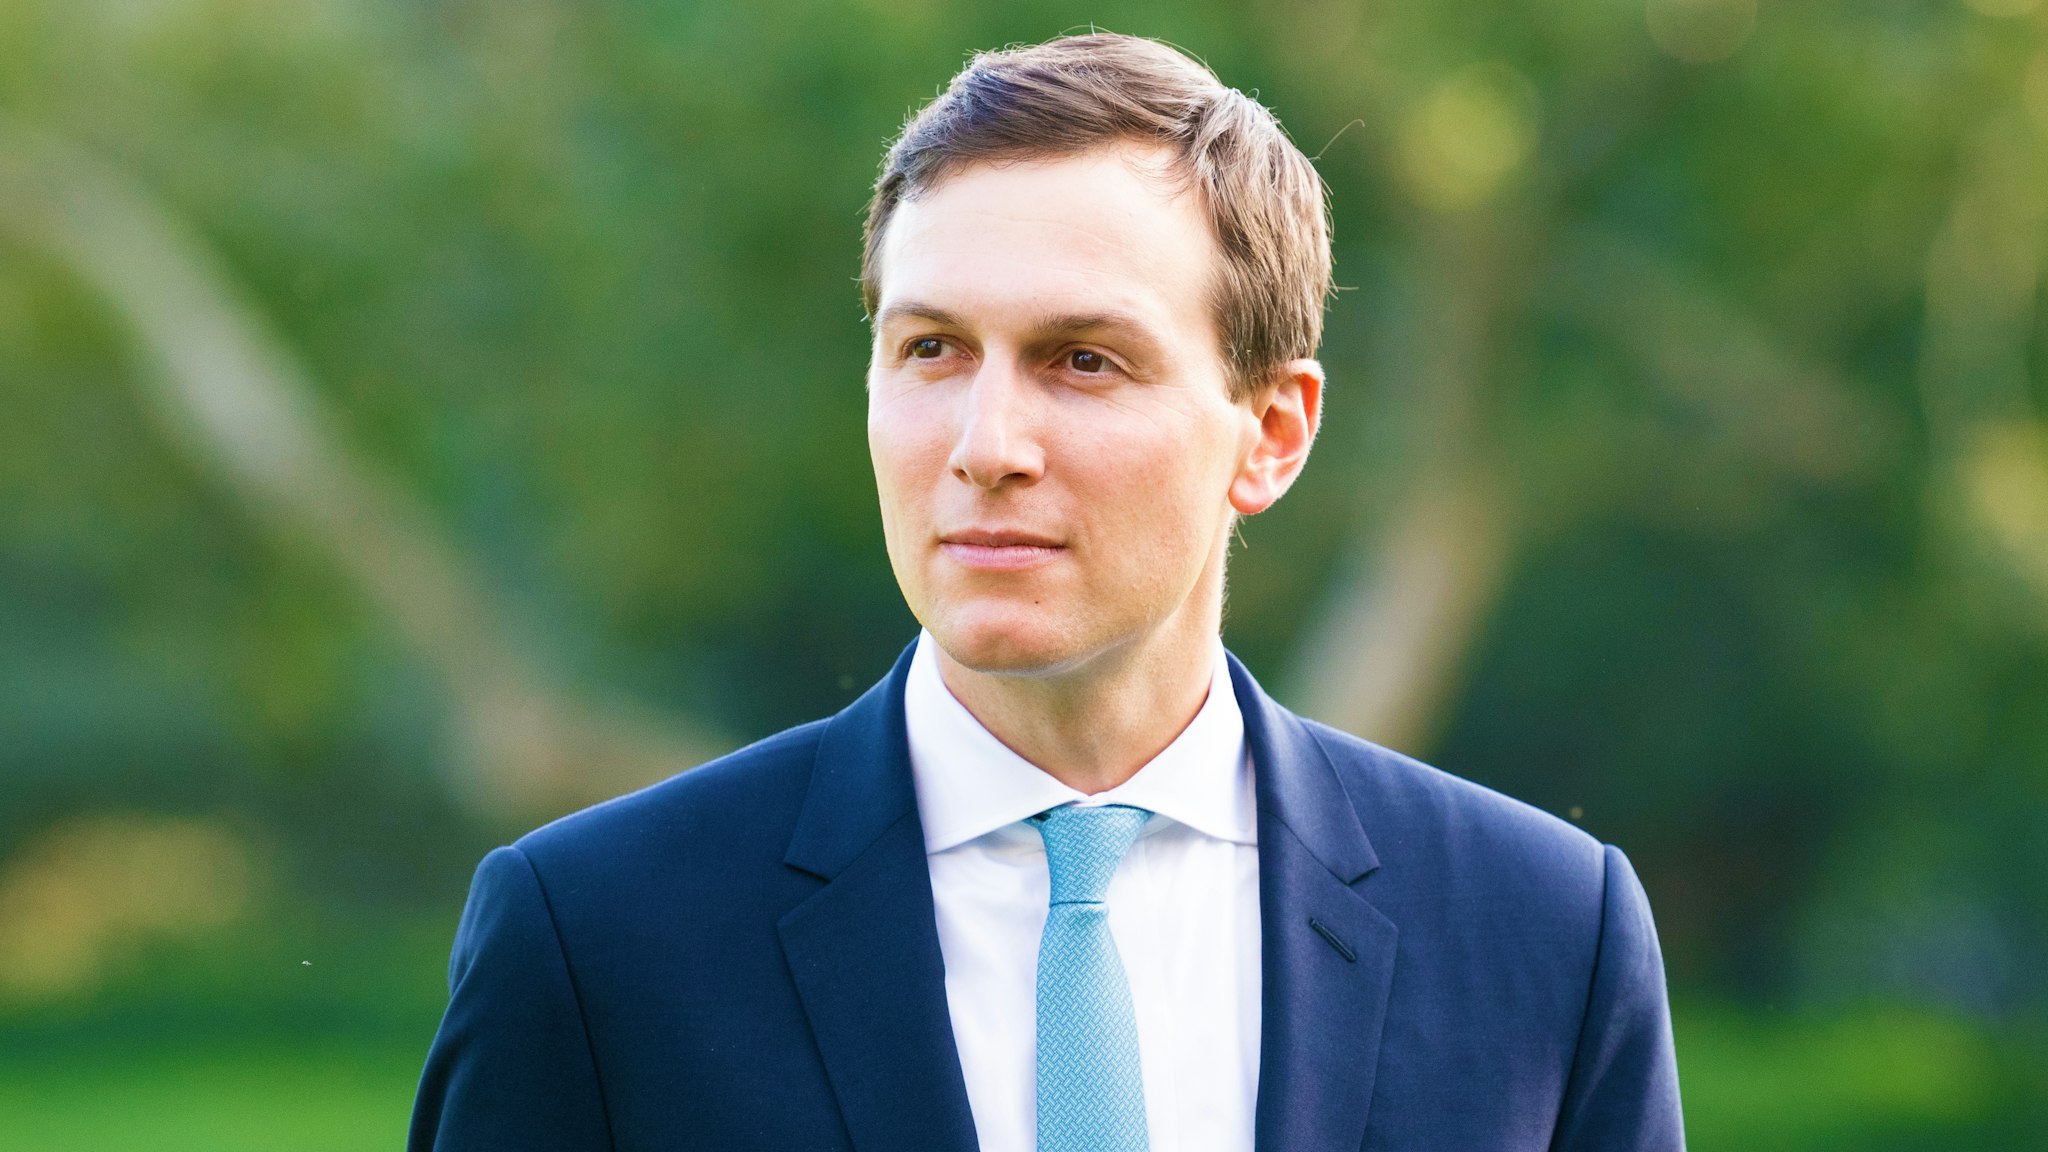 WASHINGTON, DC, UNITED STATES - 2018/10/08: Jared Kushner, Senior Advisor to the President of the United States seen posing for a picture during the South Lawn of the White House in Washington, DC.